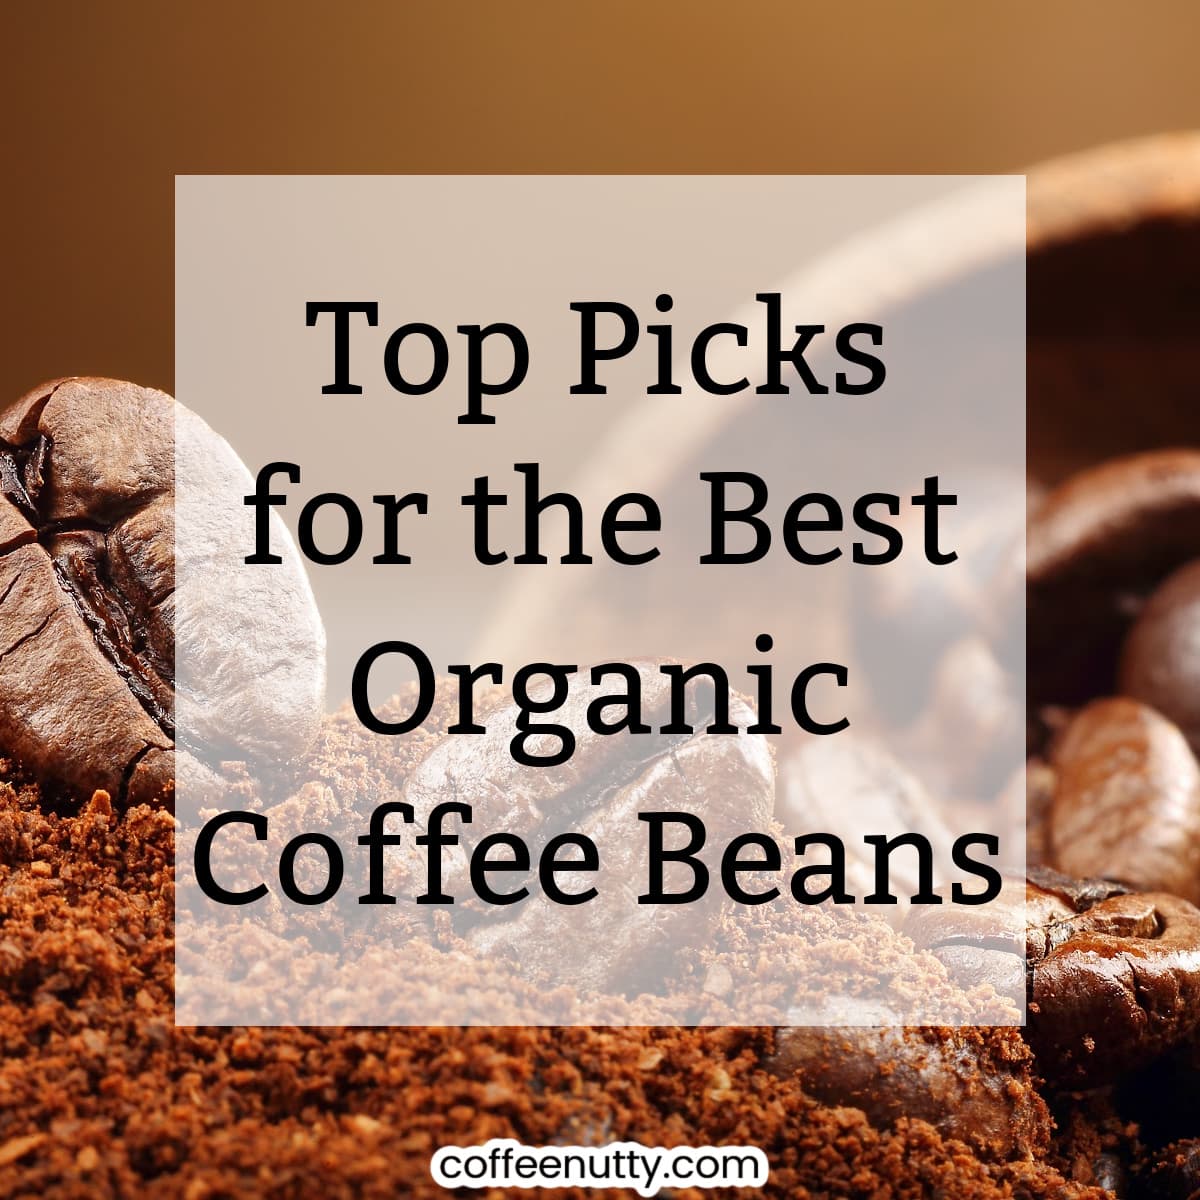 Coffee beans and grounds with brown backdrop with overlay text "our top picks for the best organic coffee beans".